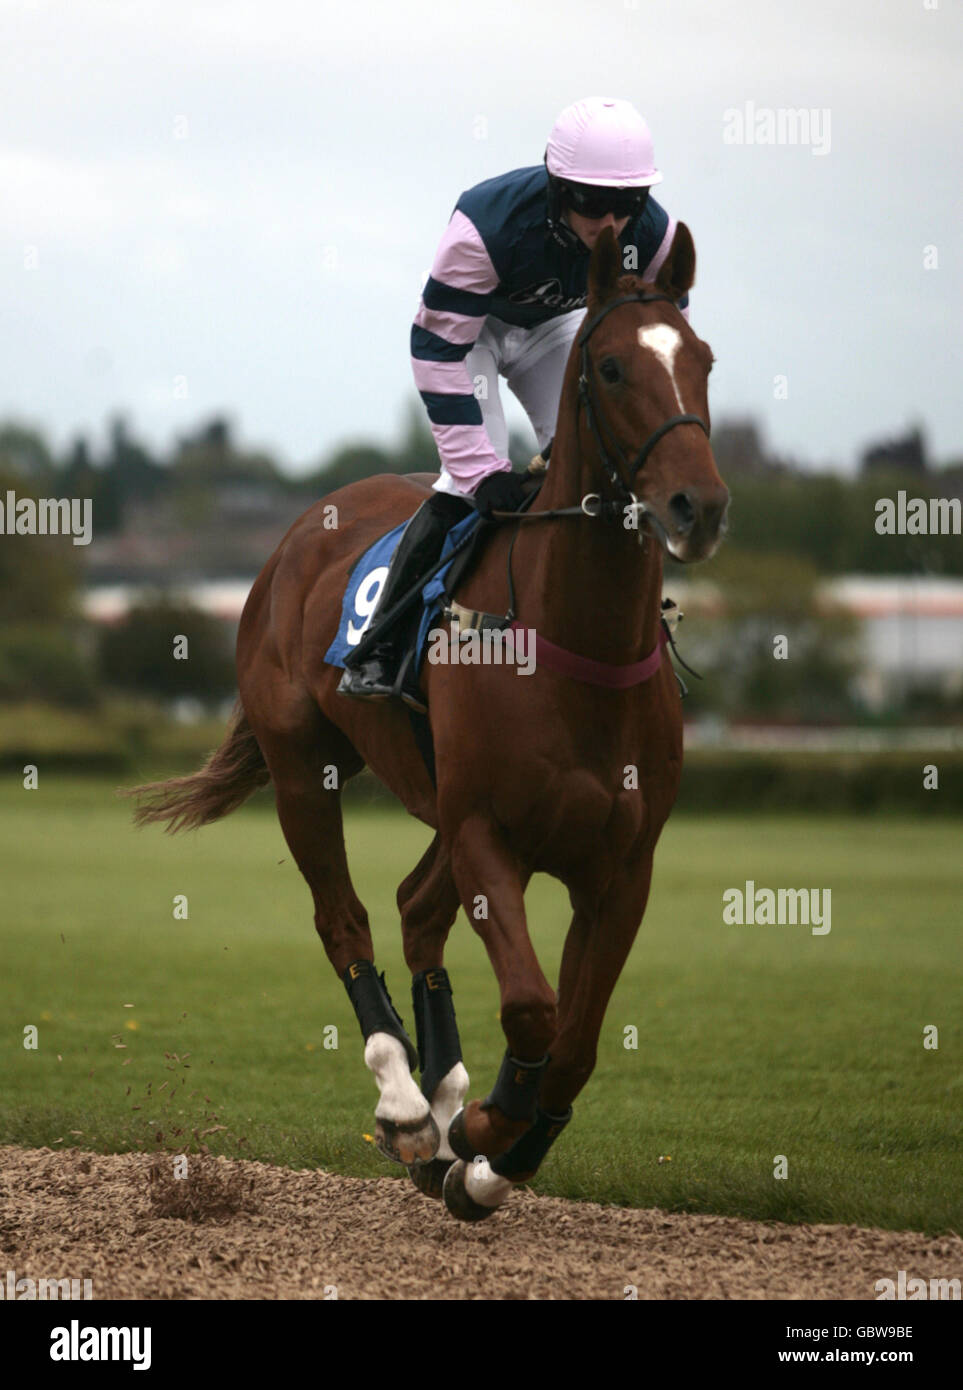 Horse Racing - Wye Valley Brewery Day - Hereford Racecourse. Naxox ridden by William Biddick going to post for the Barrels Hereford Handicap Chase Stock Photo